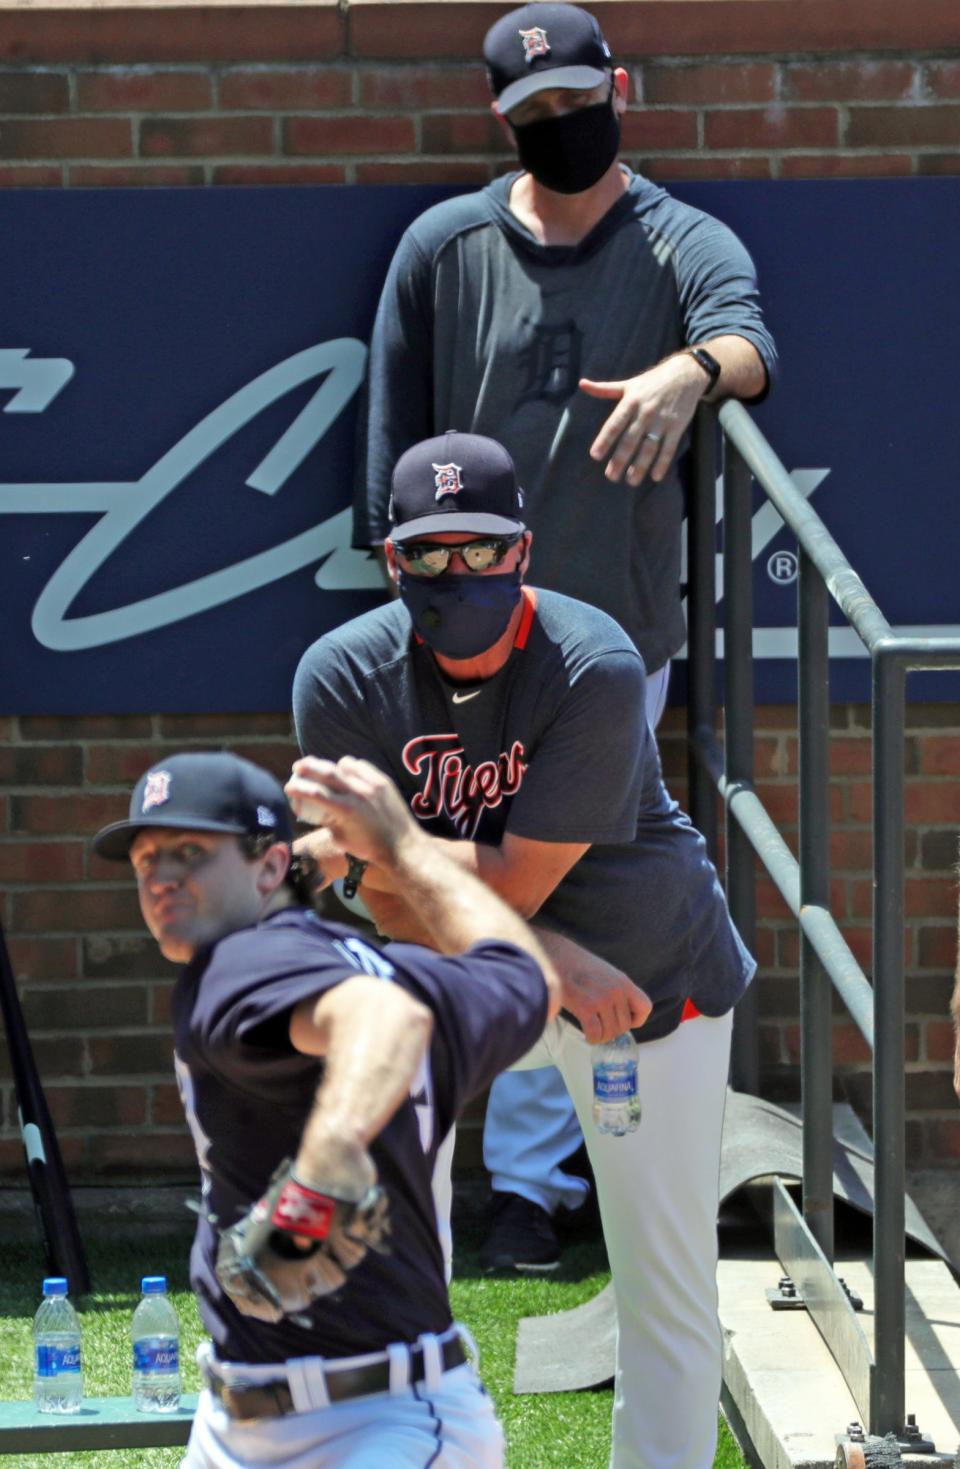 The Detroit Tigers held workouts at Comerica Park Saturday, July 4, 2020. Pitching coach Rick Anderson watches prospect Casey Mize during his bullpen session.